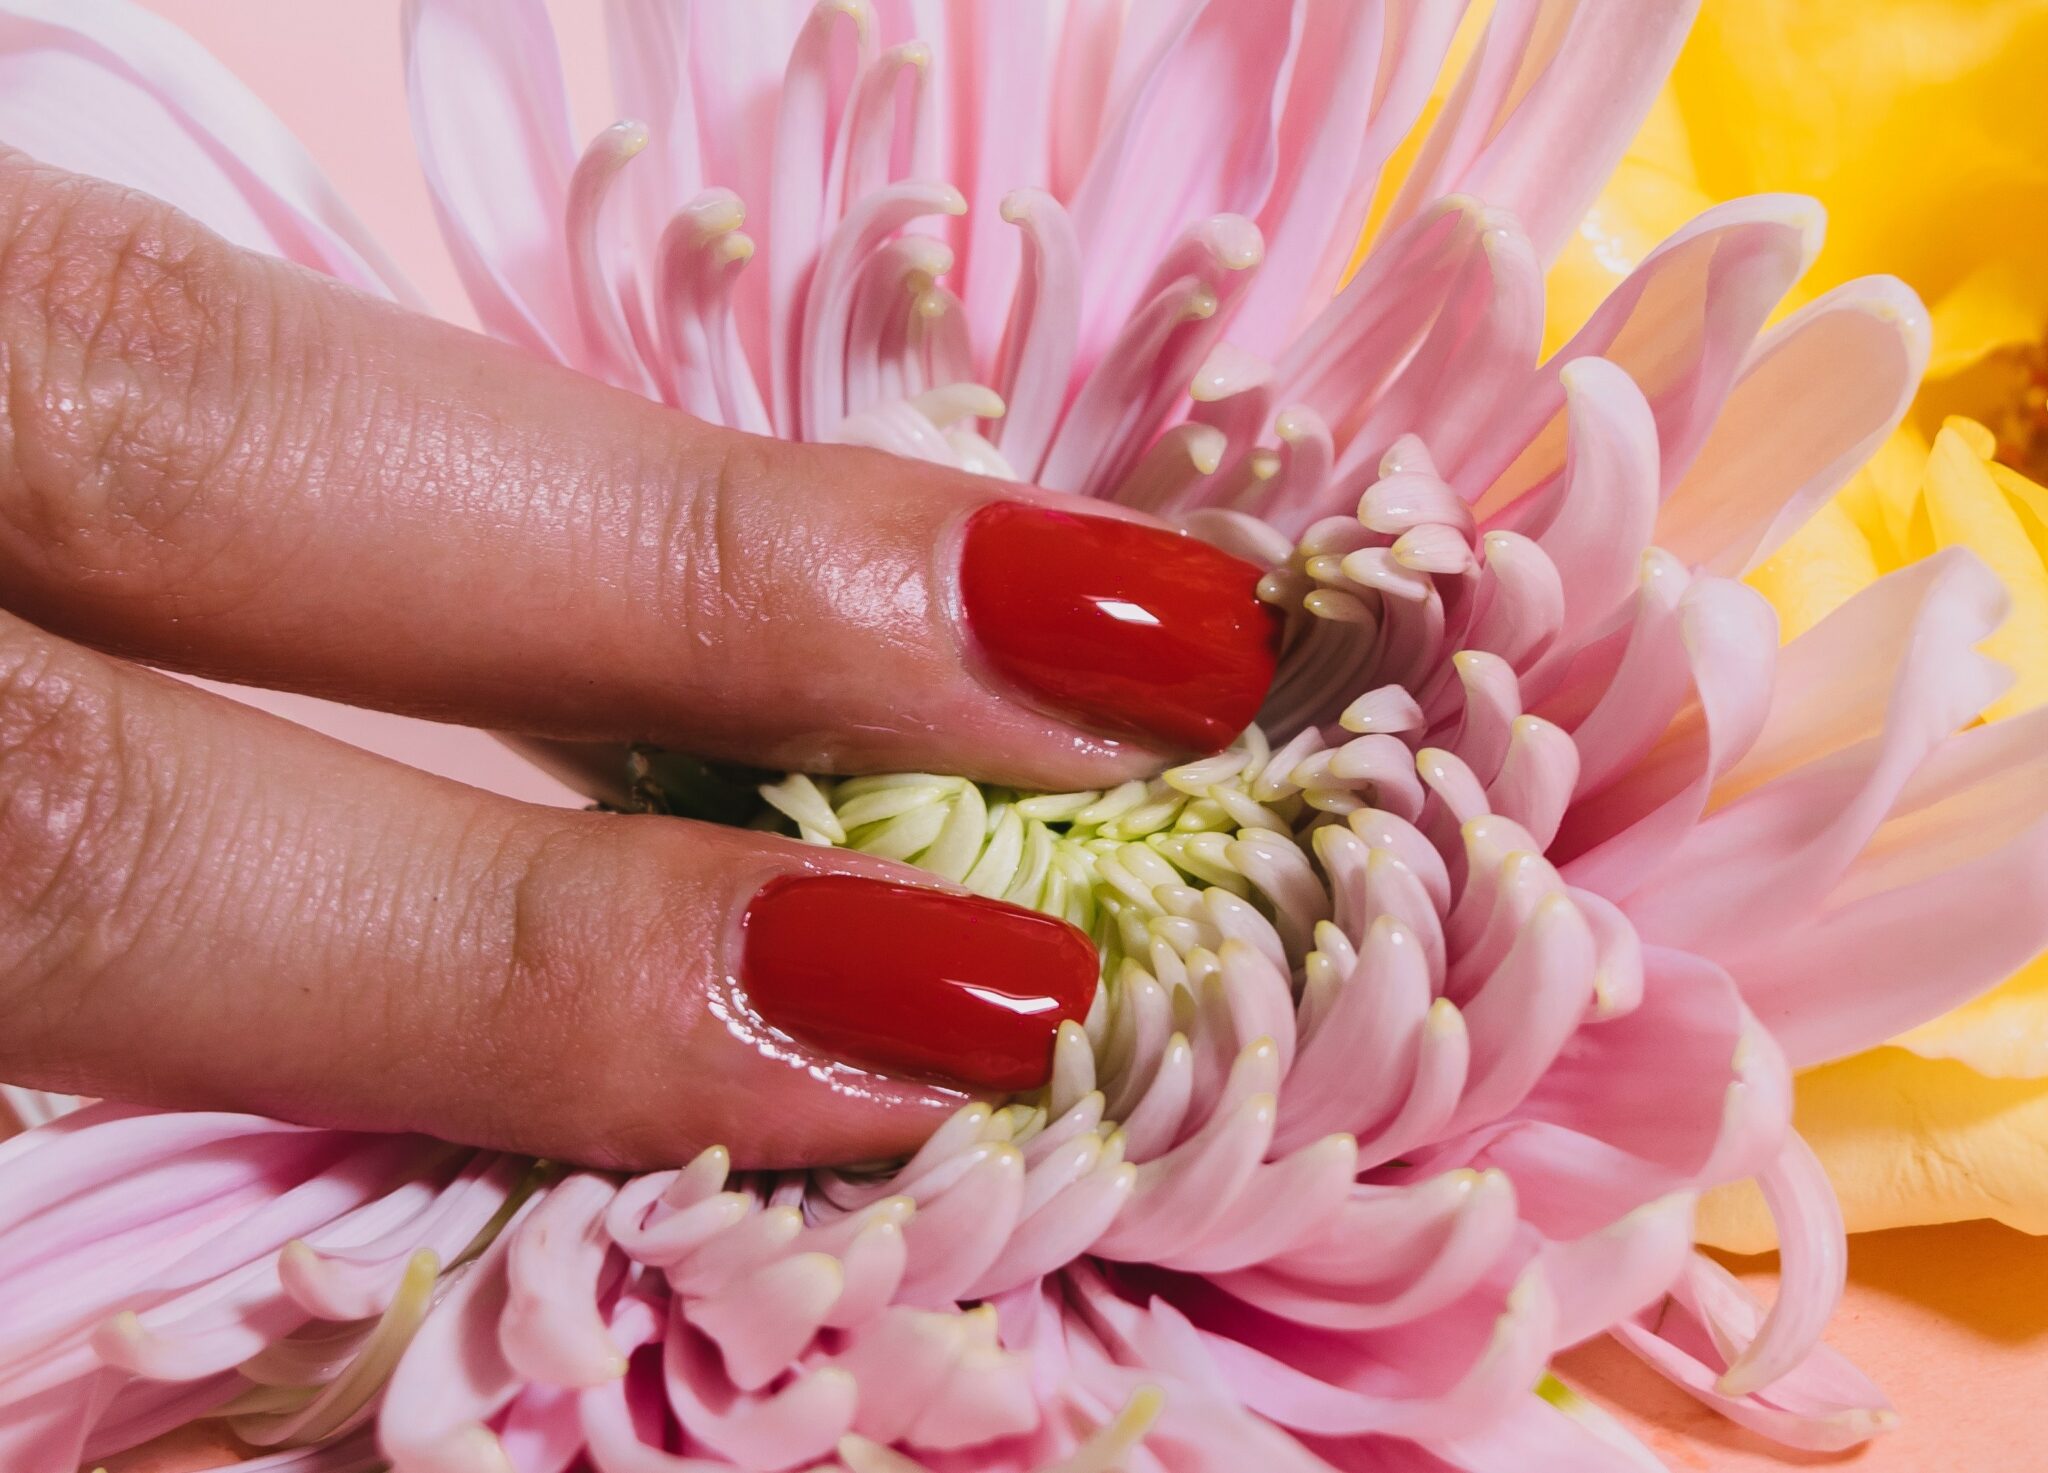 A woman's red-tipped fingers massaging the center of a flower.